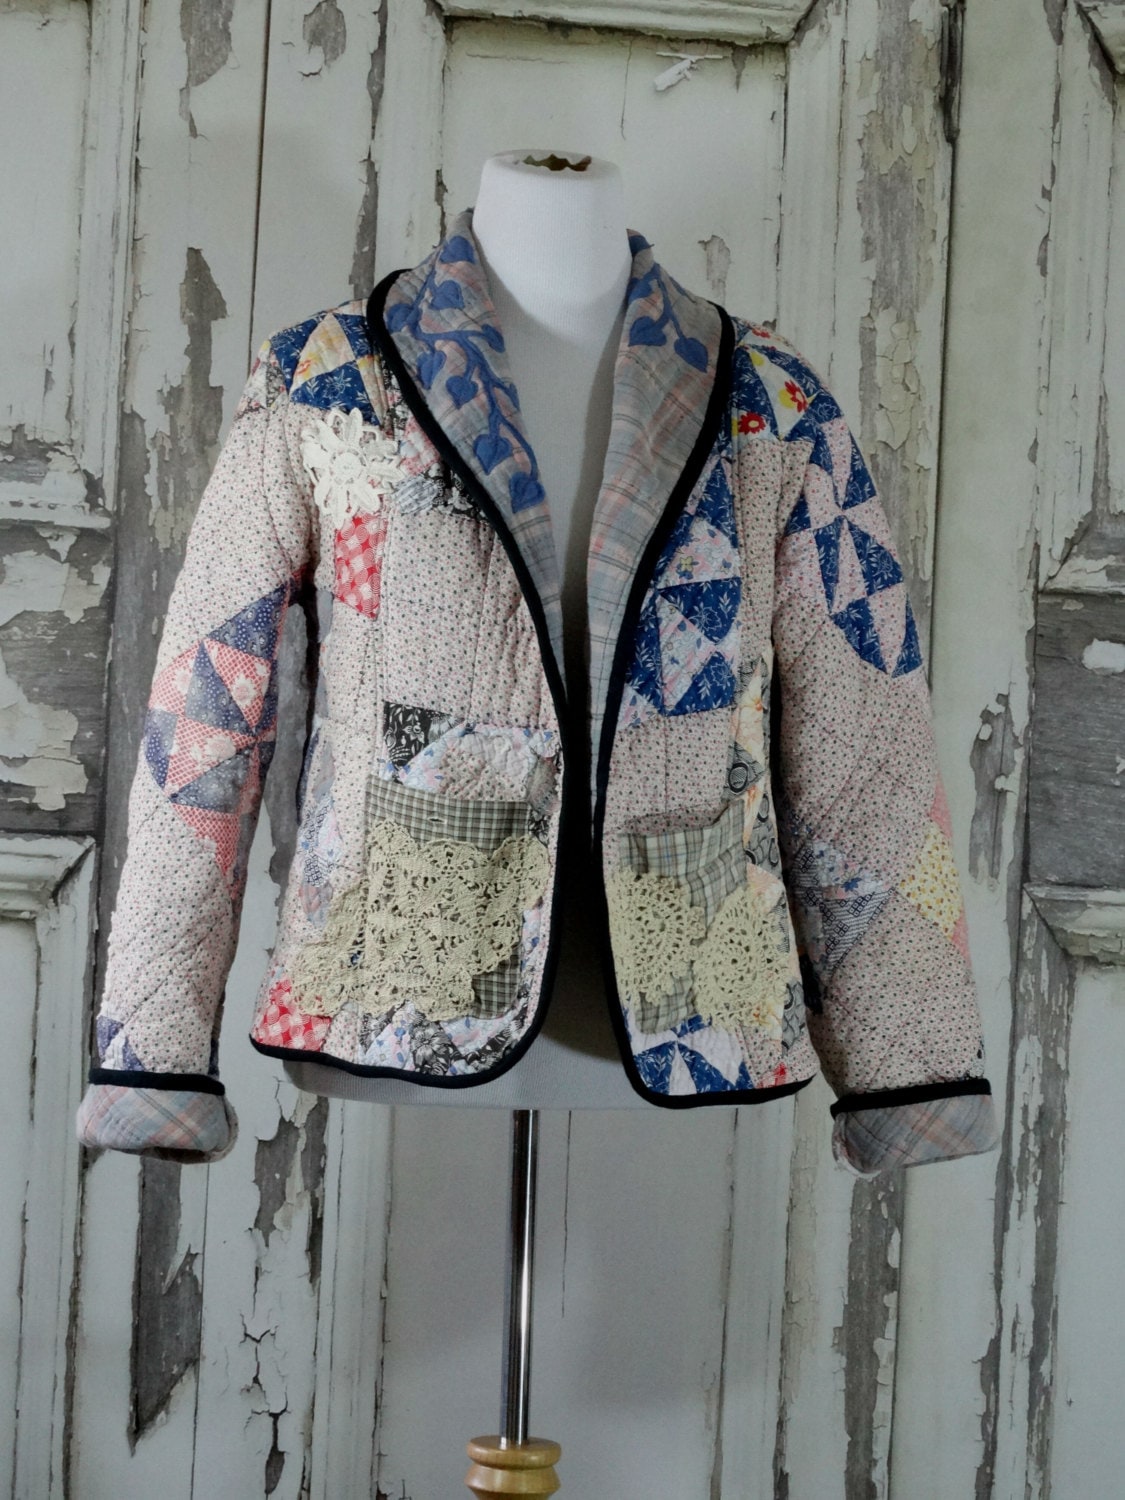 Jacket from Vintage Quilt Women's Quilted Blazer Jacket | Etsy